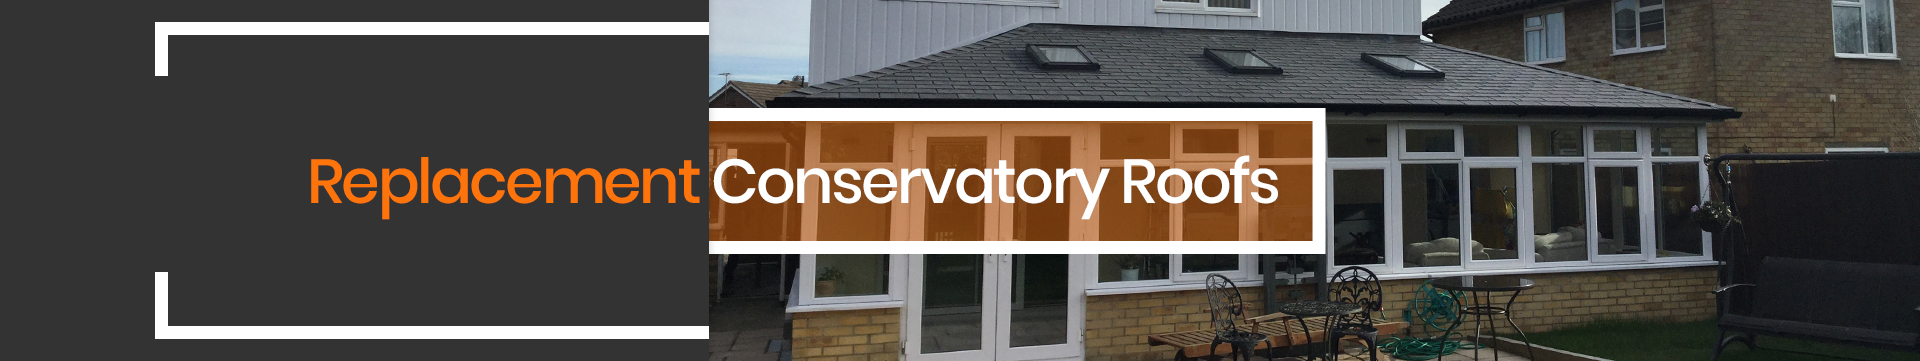 Replacement Conservatory Roofs banner Facelift